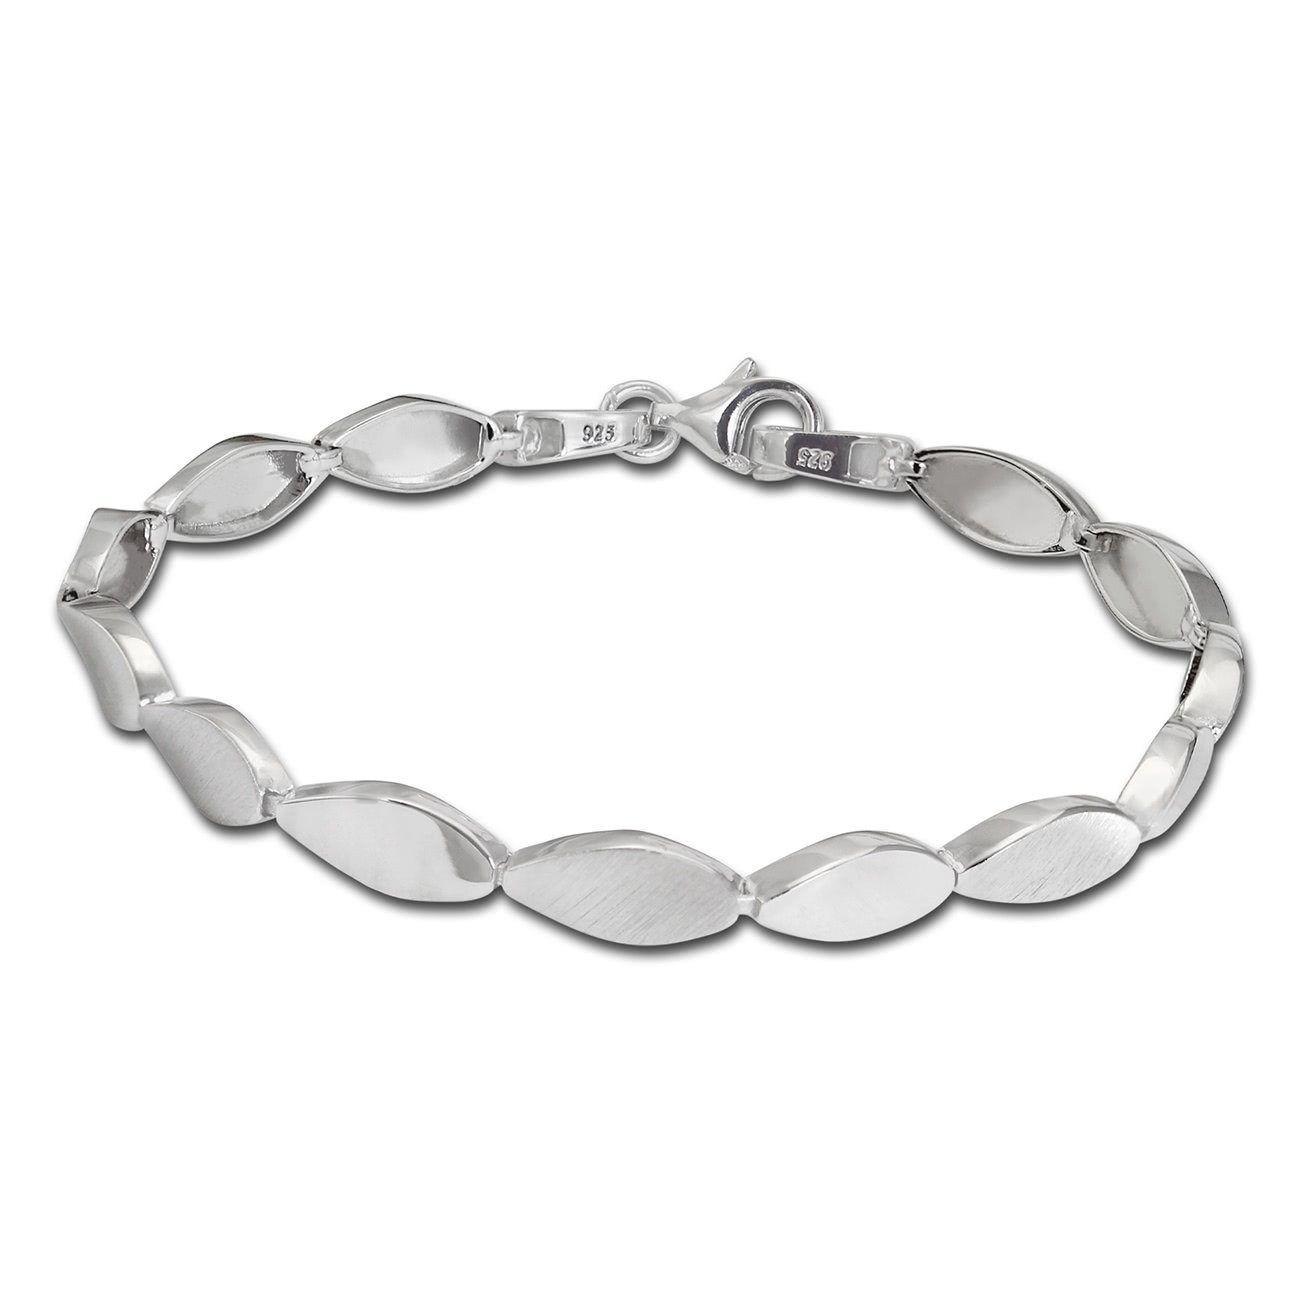 SilberDream Silberarmband »SilberDream Armband Tropfen 925 Silber«  (Armband), Damen Armband (Tropfen) ca. 19cm, 925 Sterling Silber, Farbe:  silber online kaufen | OTTO